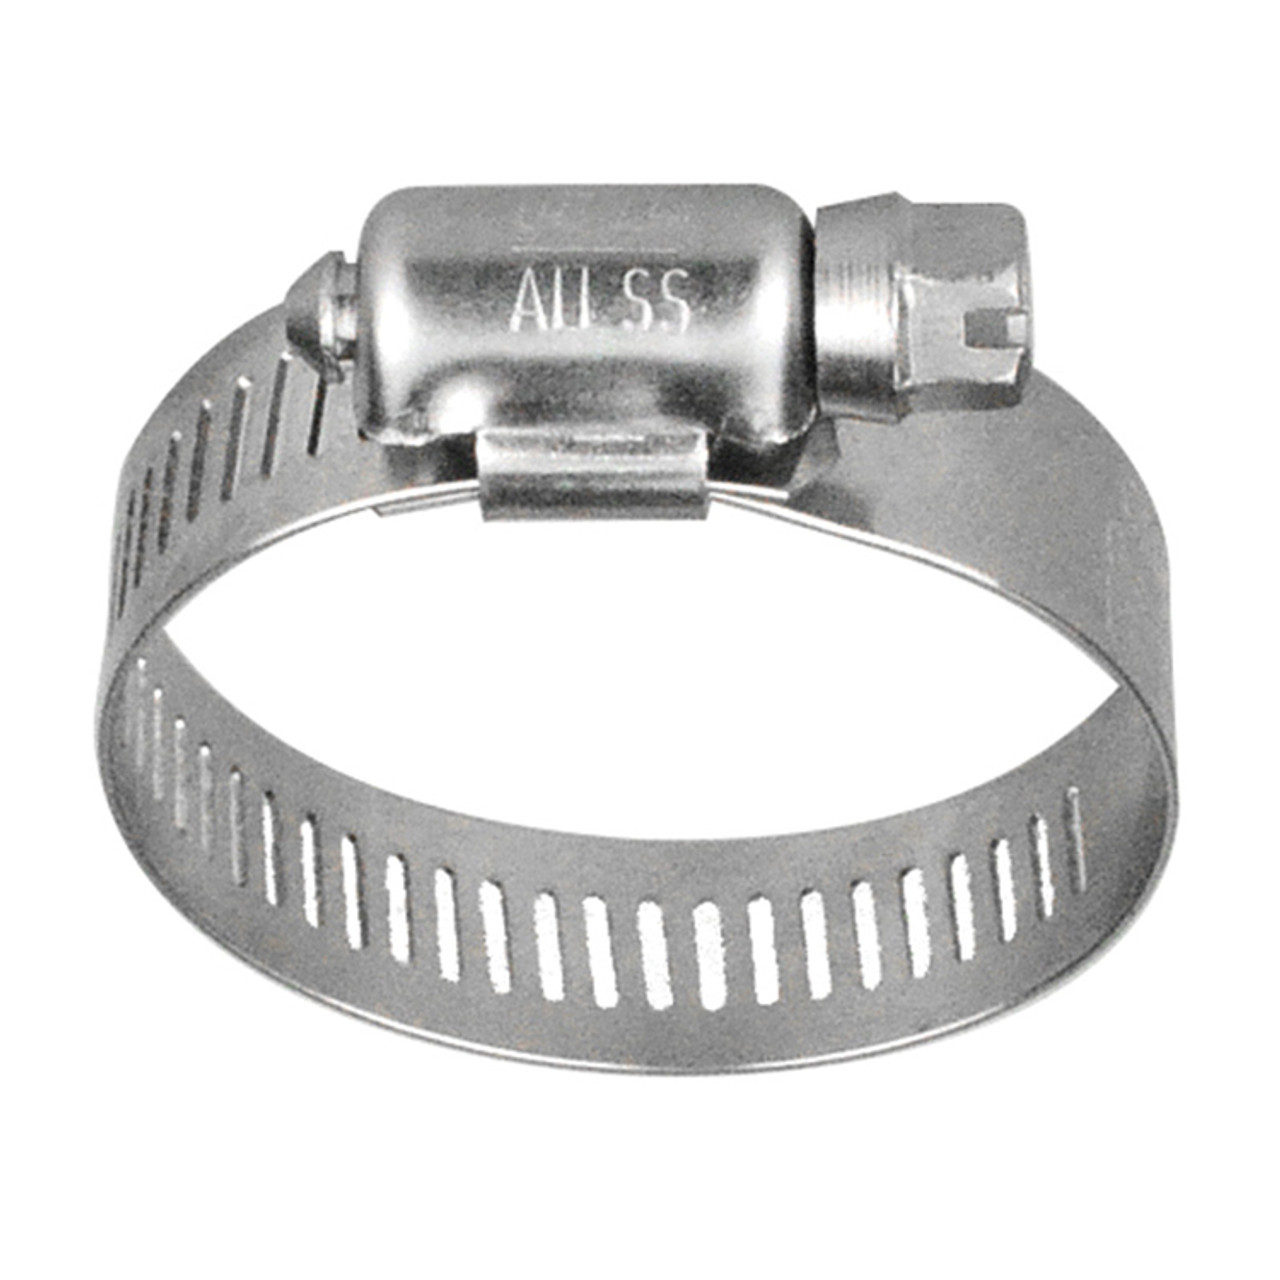 5-1/4" Stainless Steel Worm Gear Hose Clamp   G8-84